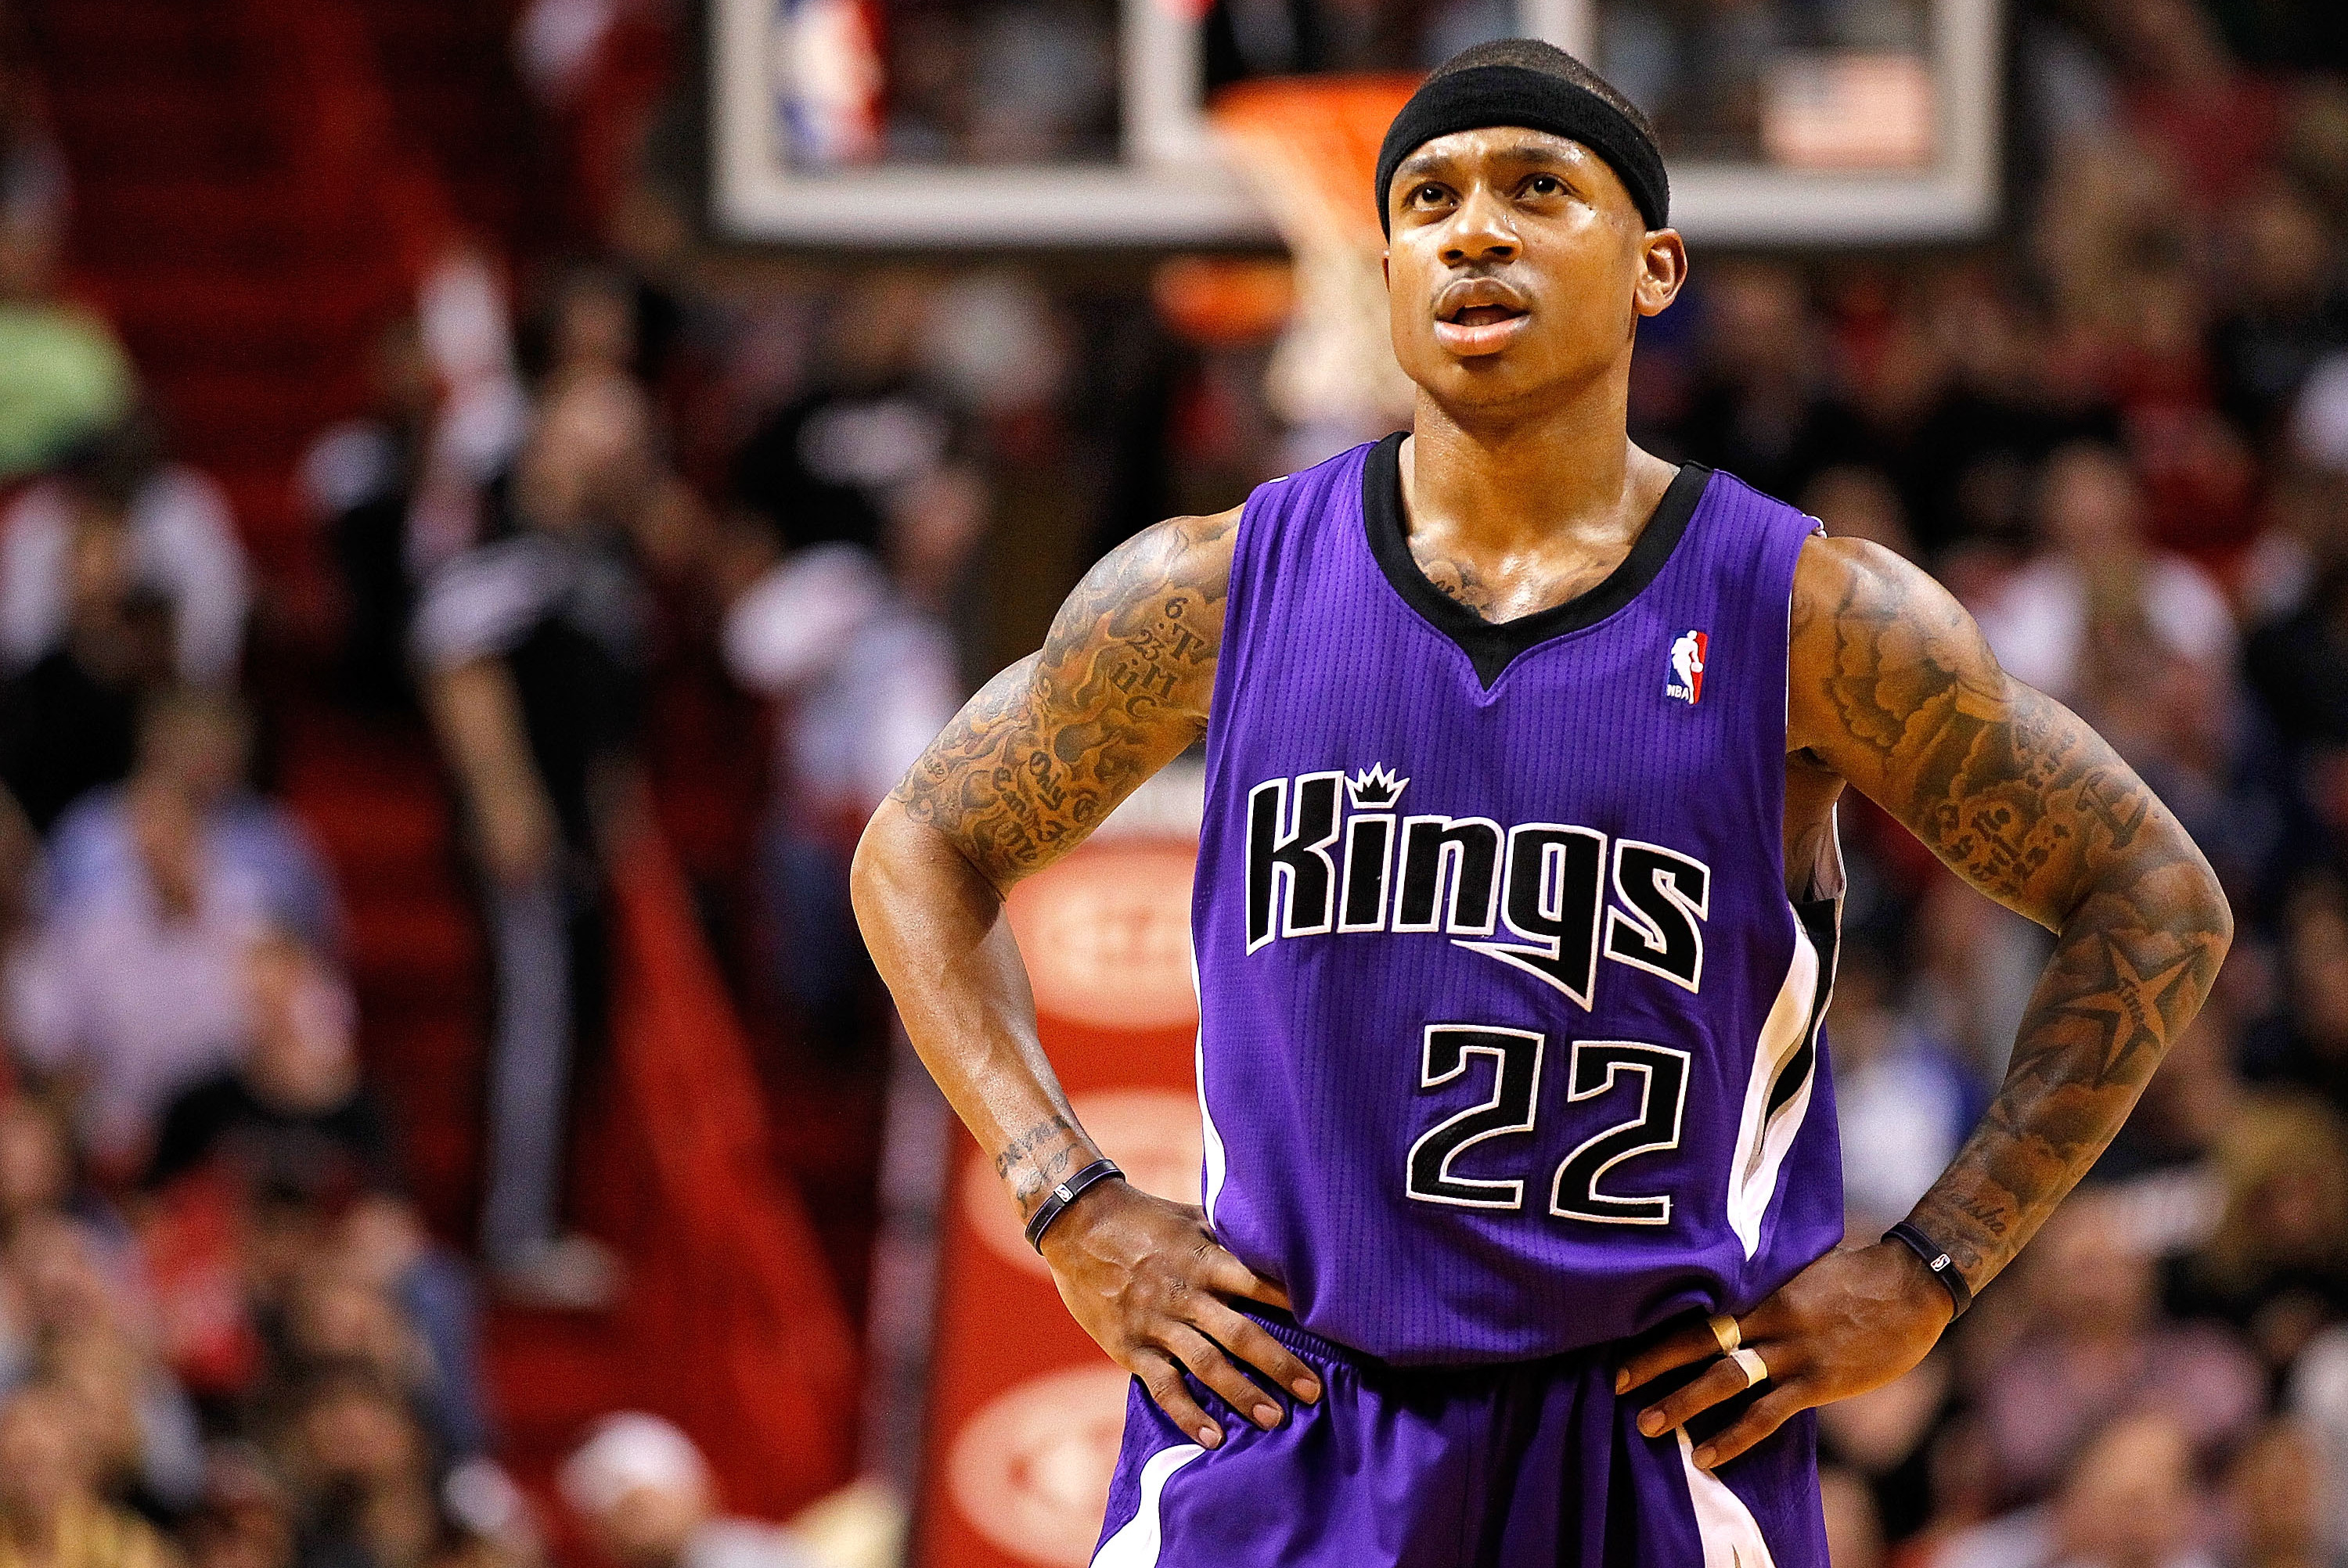 Best and Worst Kings Jerseys in Franchise History, News, Scores,  Highlights, Stats, and Rumors